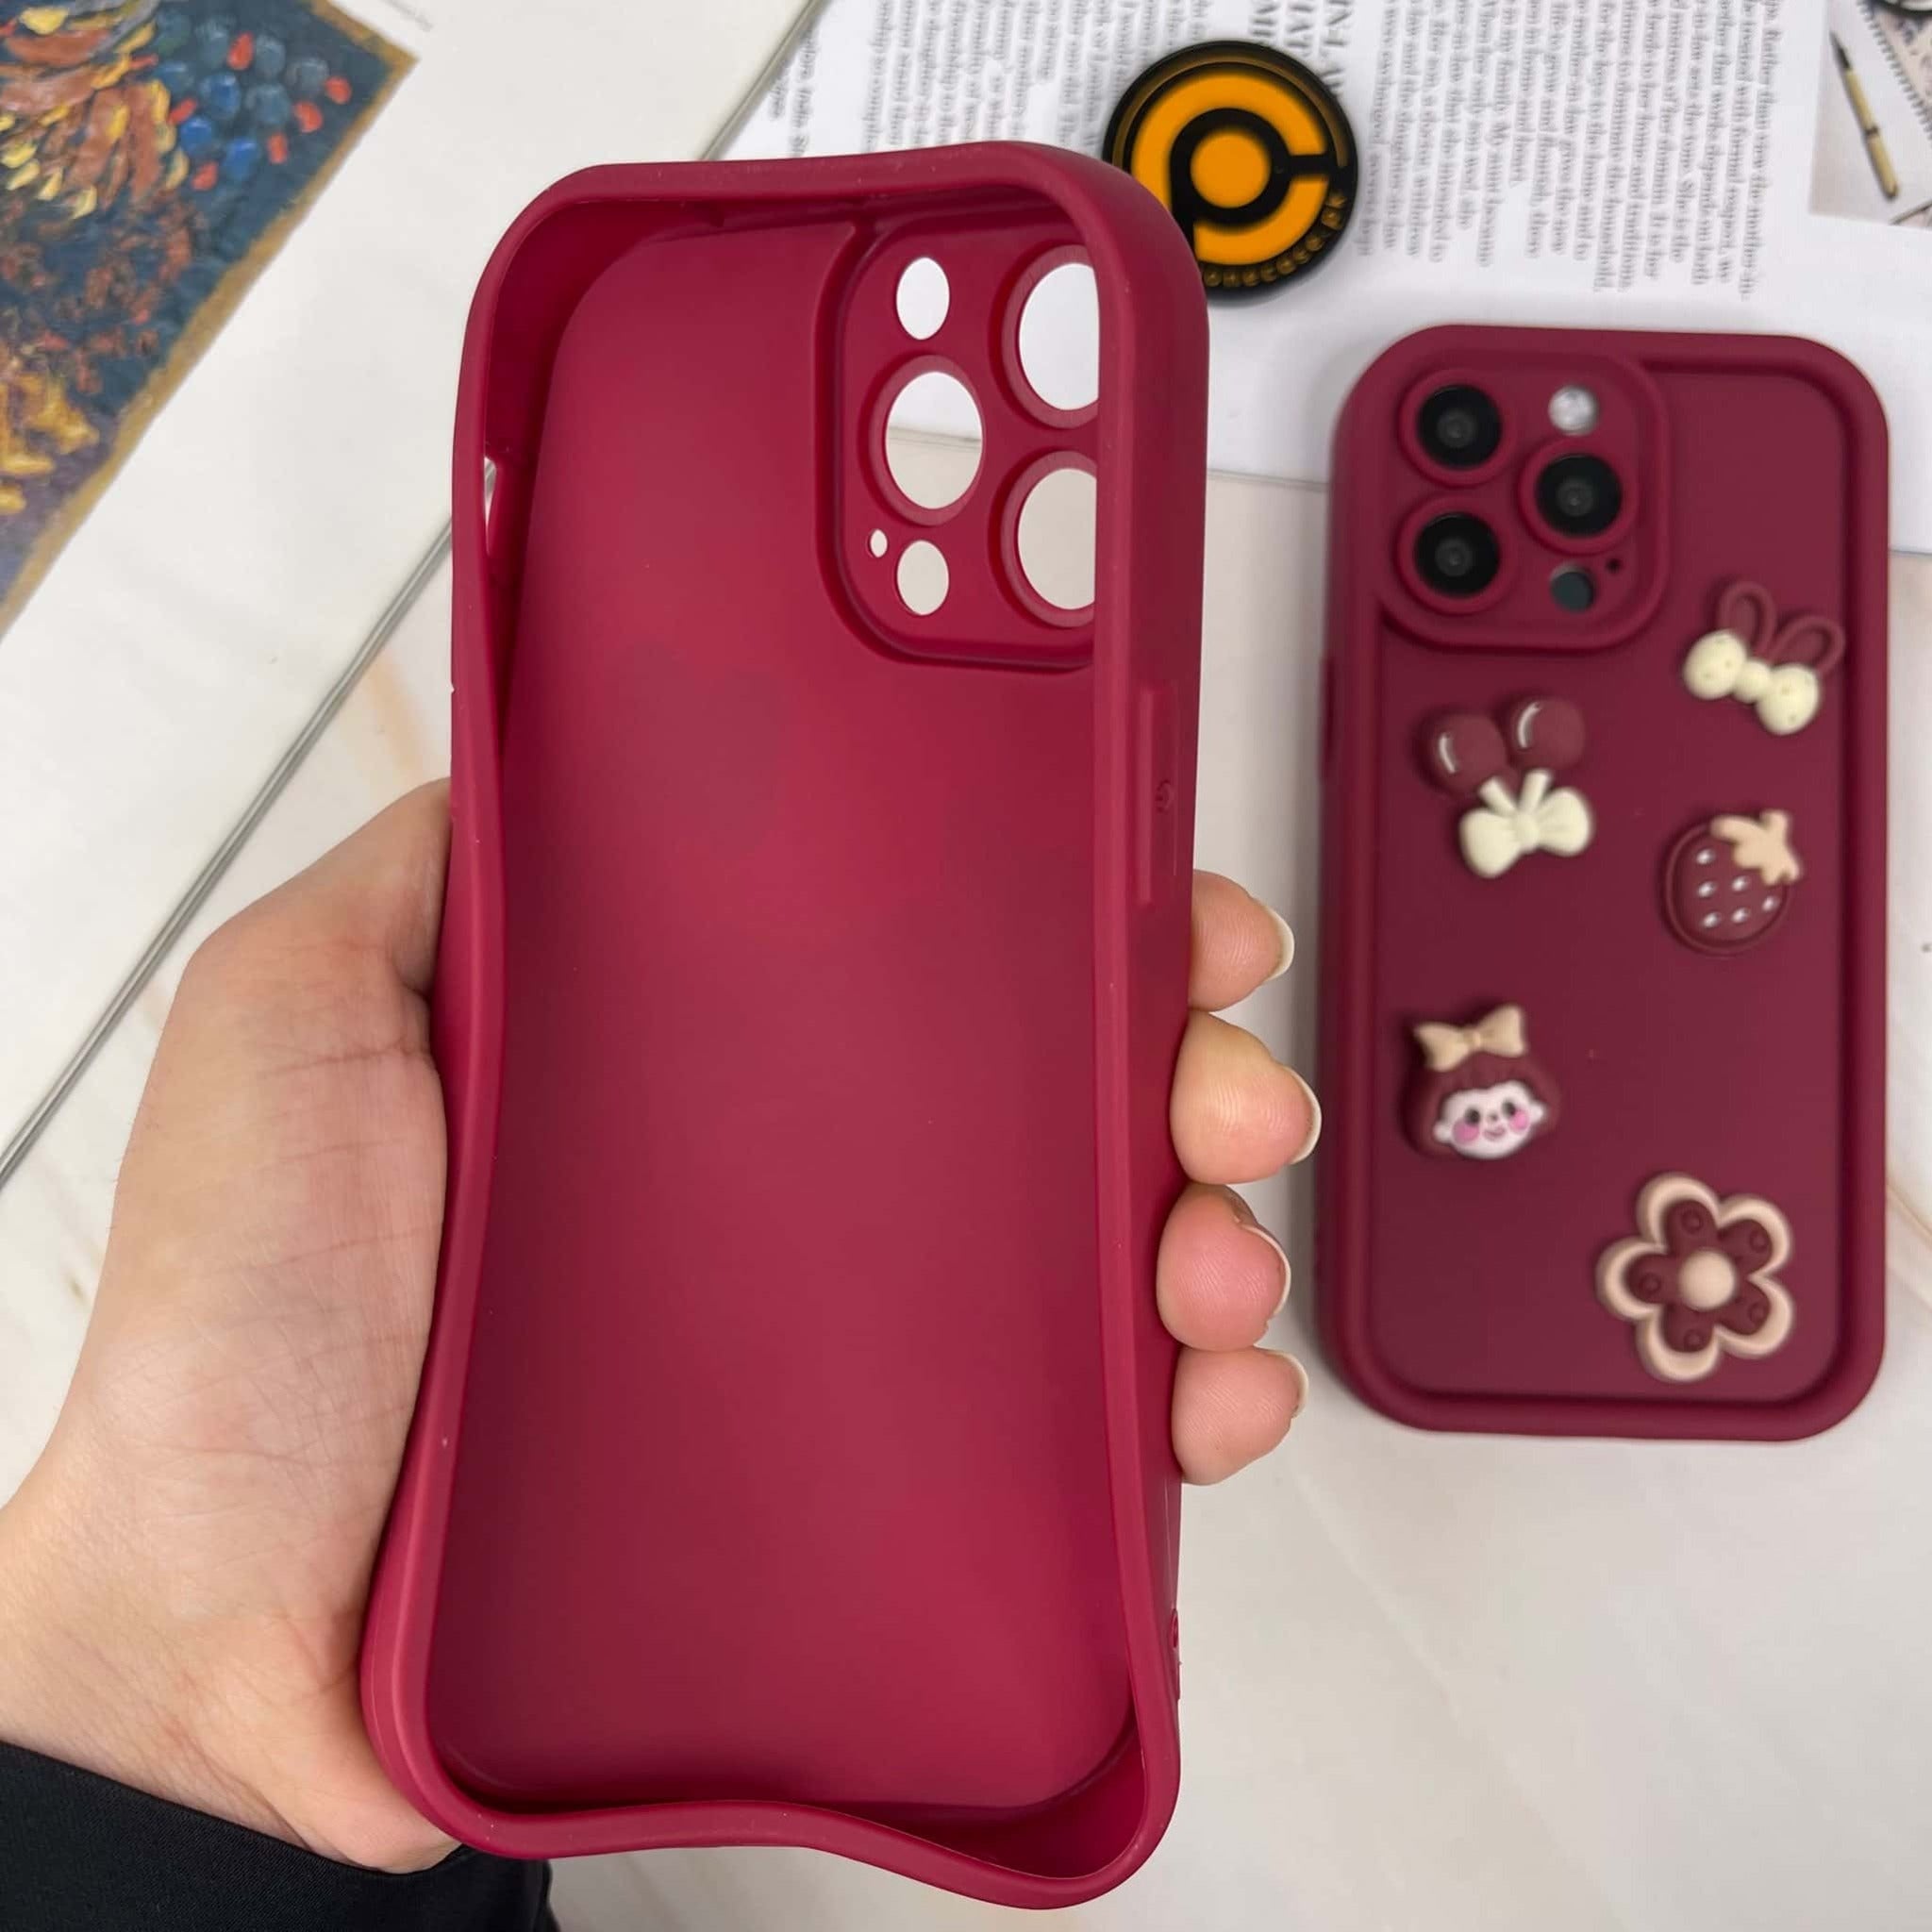 iPhone X/XS Cute 3D Cherry Flower Icons Silicon Case